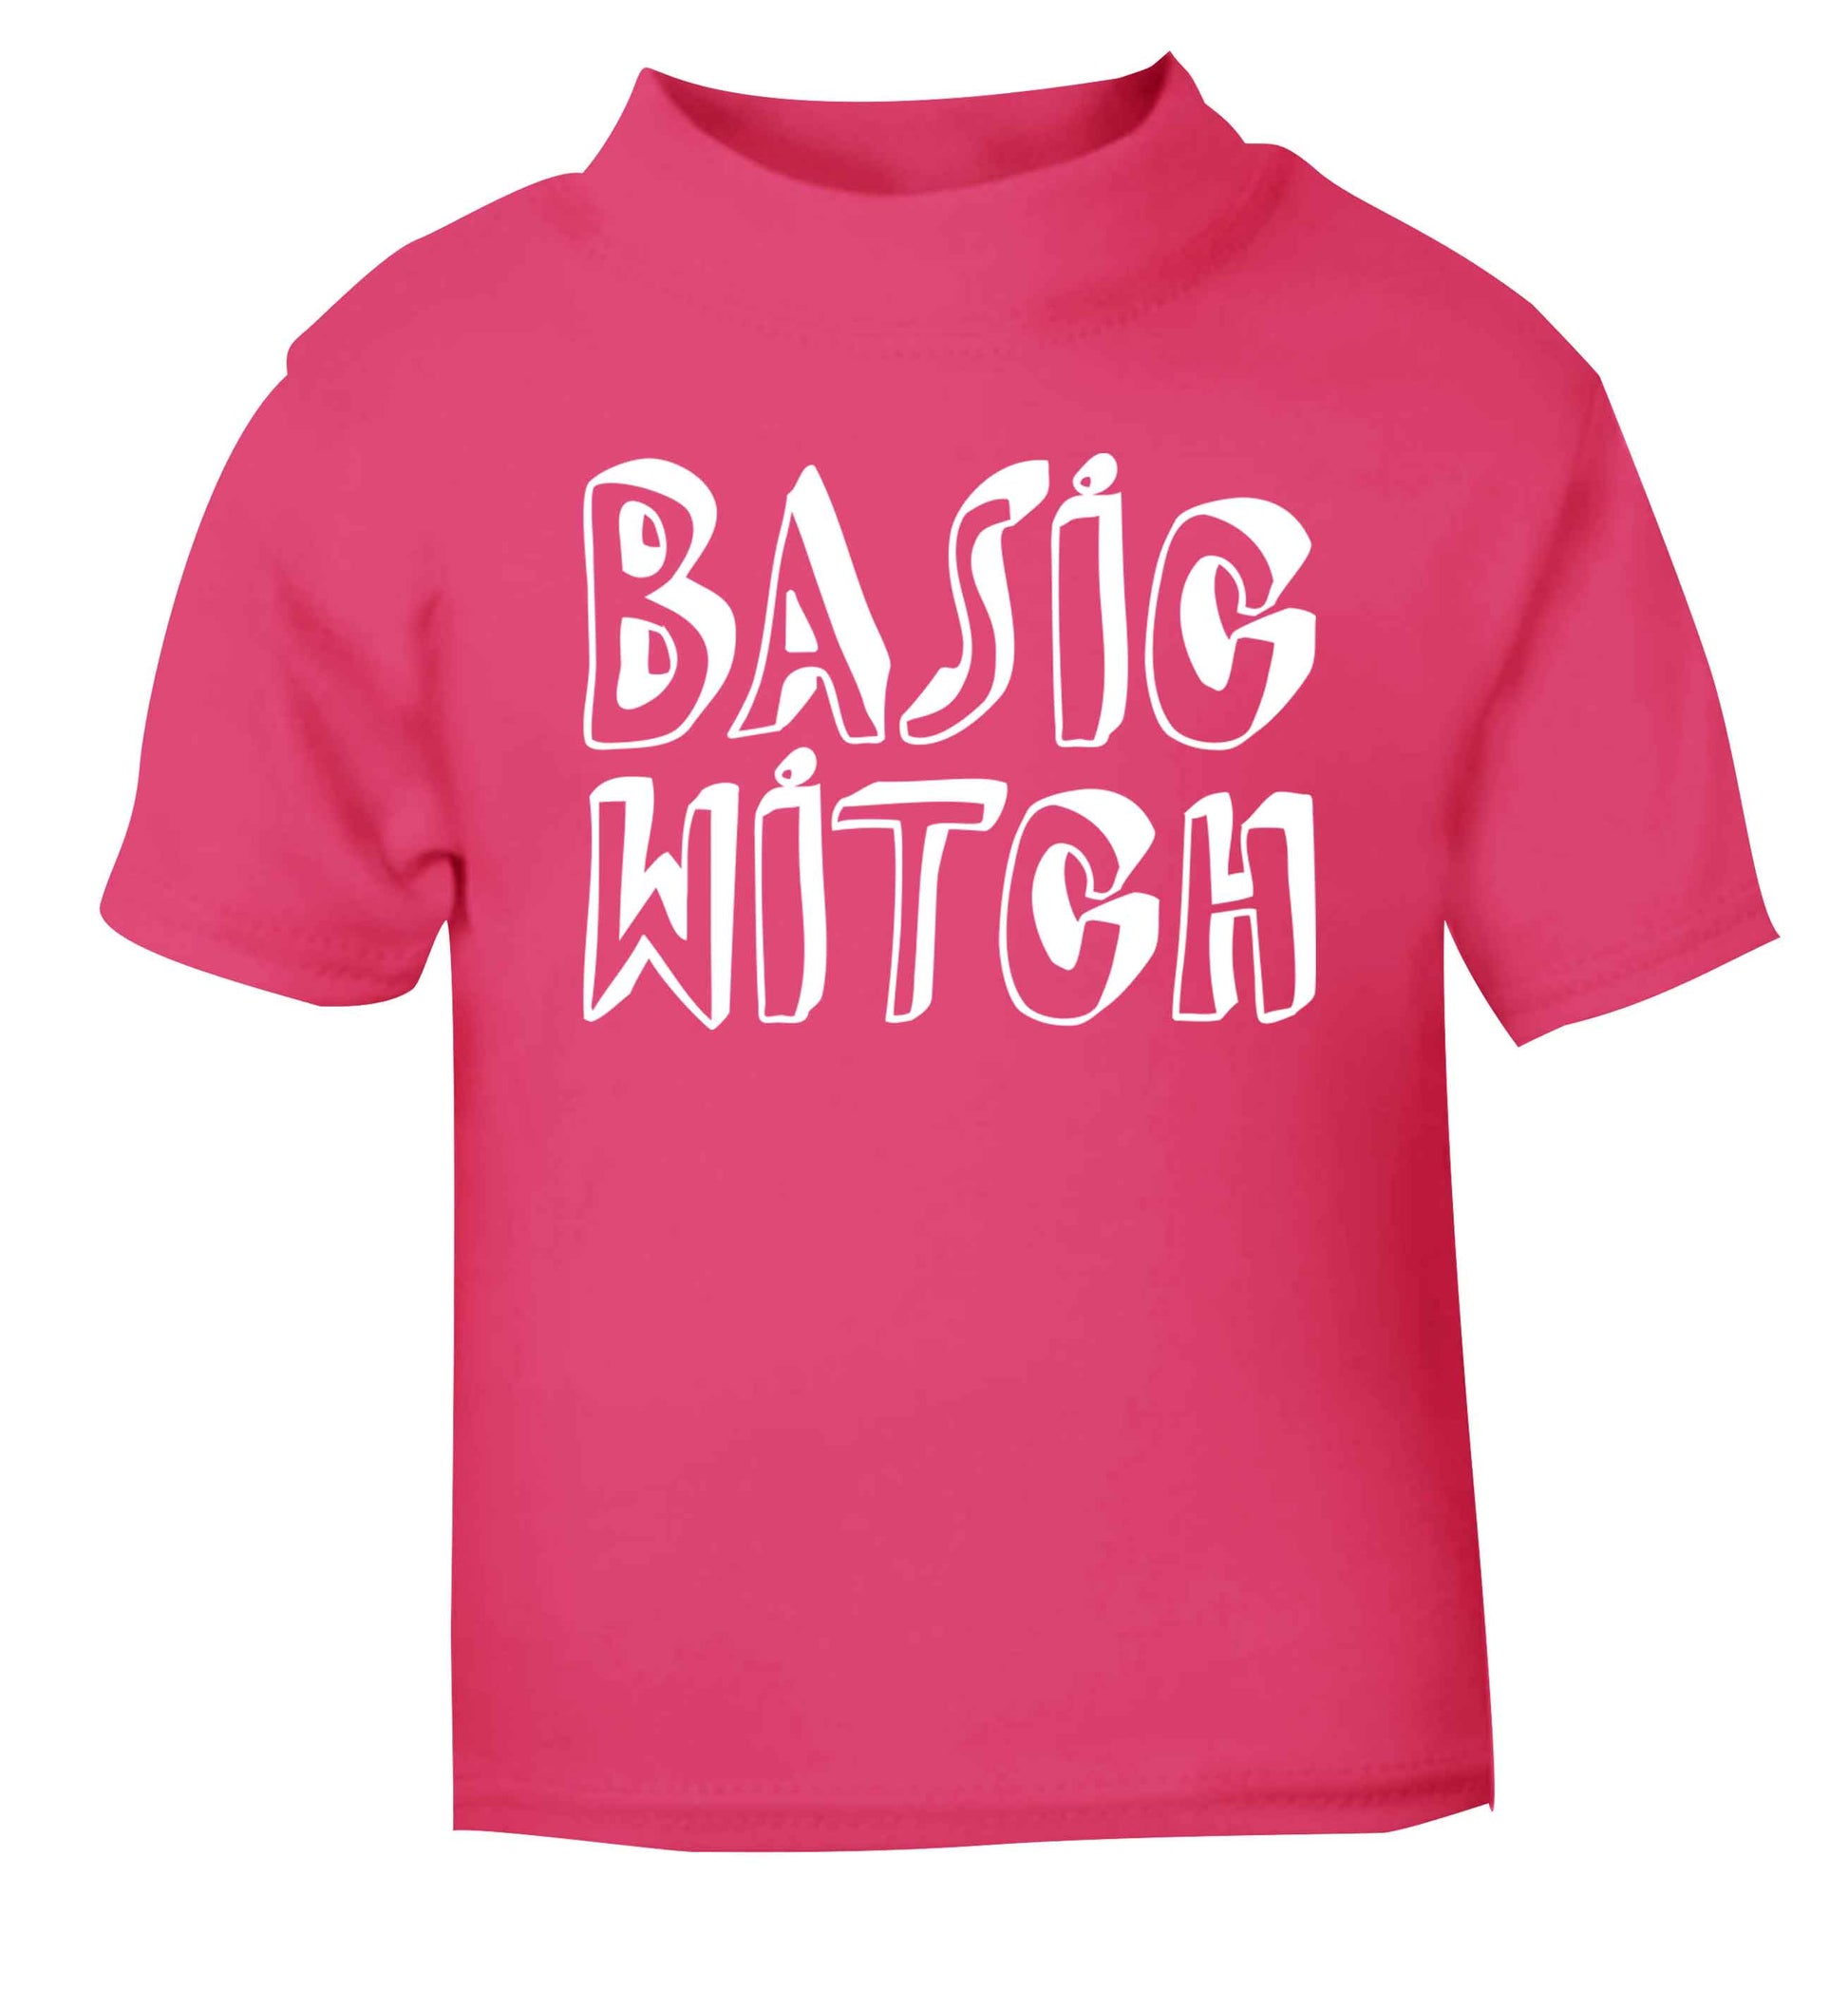 Basic witch pink baby toddler Tshirt 2 Years